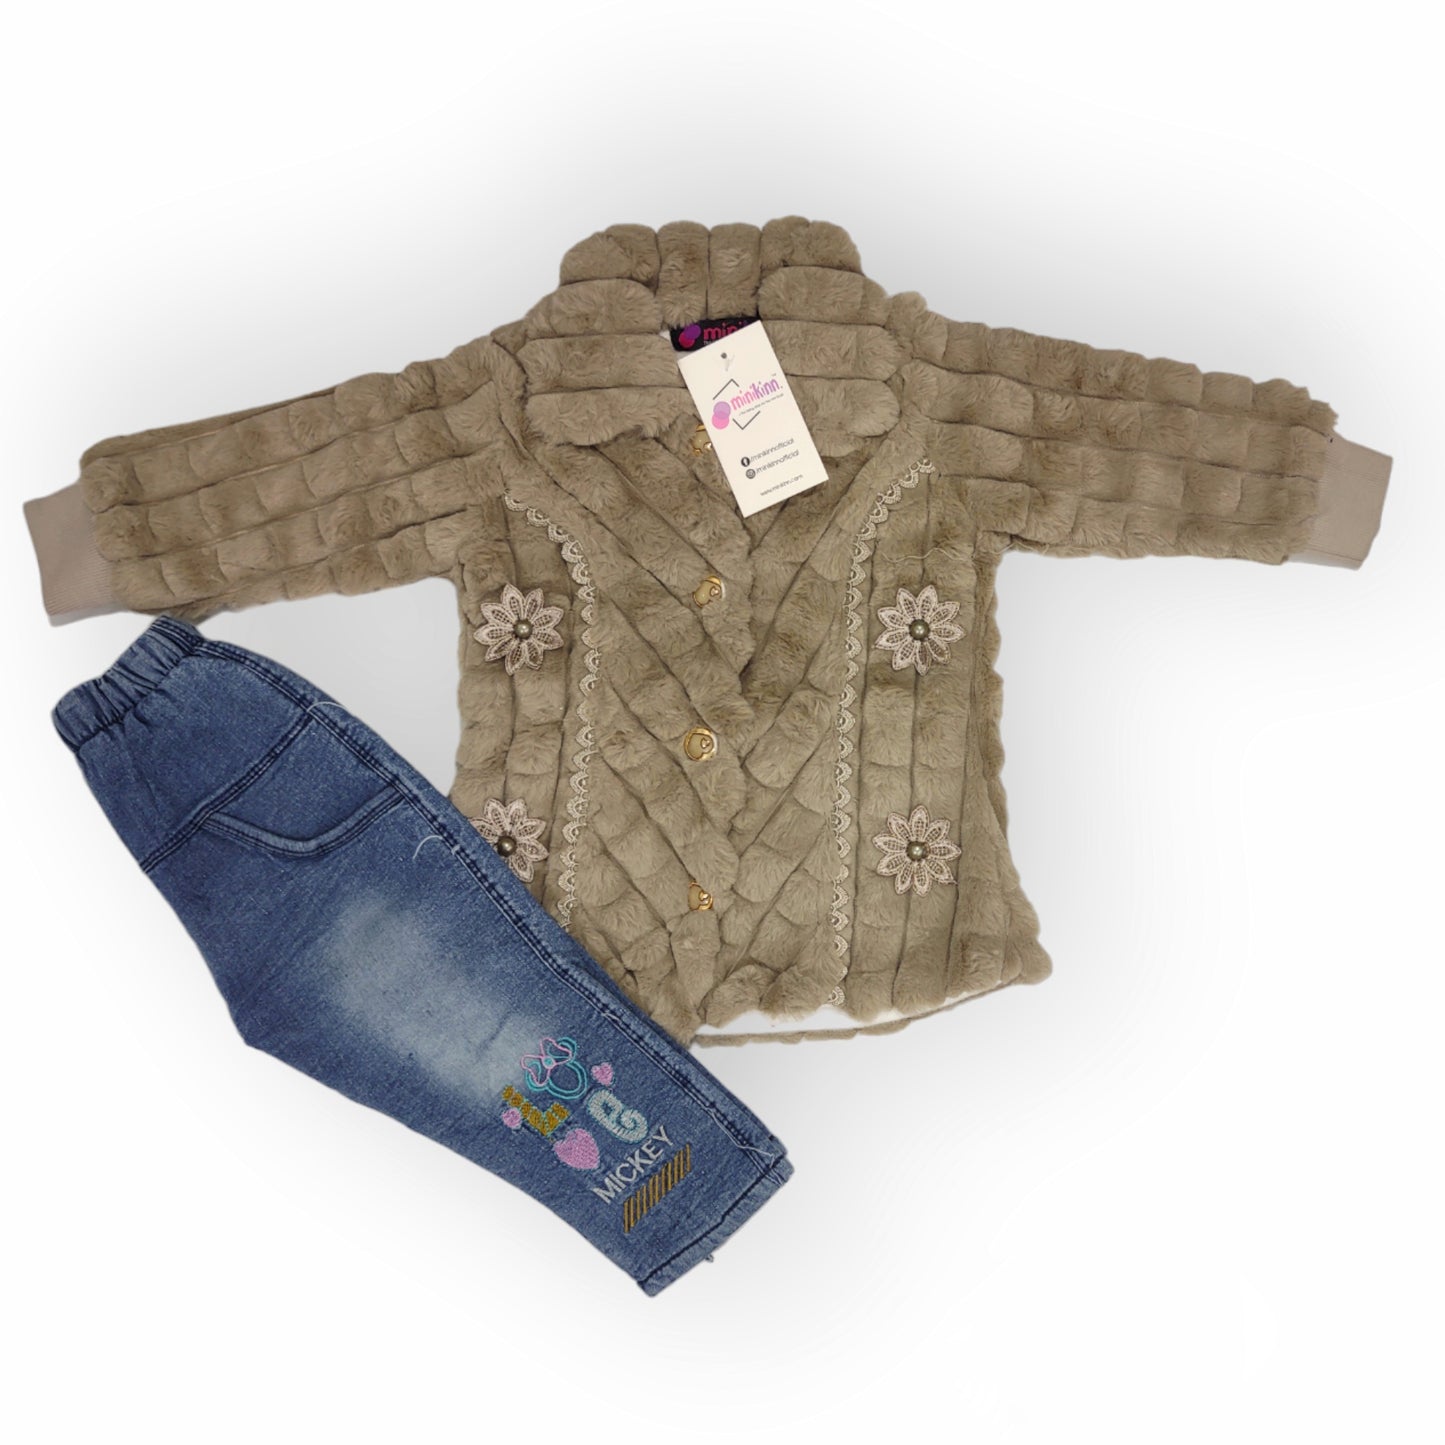 Girls Premium Luxurious Imported Furr Jacket Combined with Embroidered Denim Fleece Pants Complete Suit - 2 Piece Set (Gvl-V5-2043)